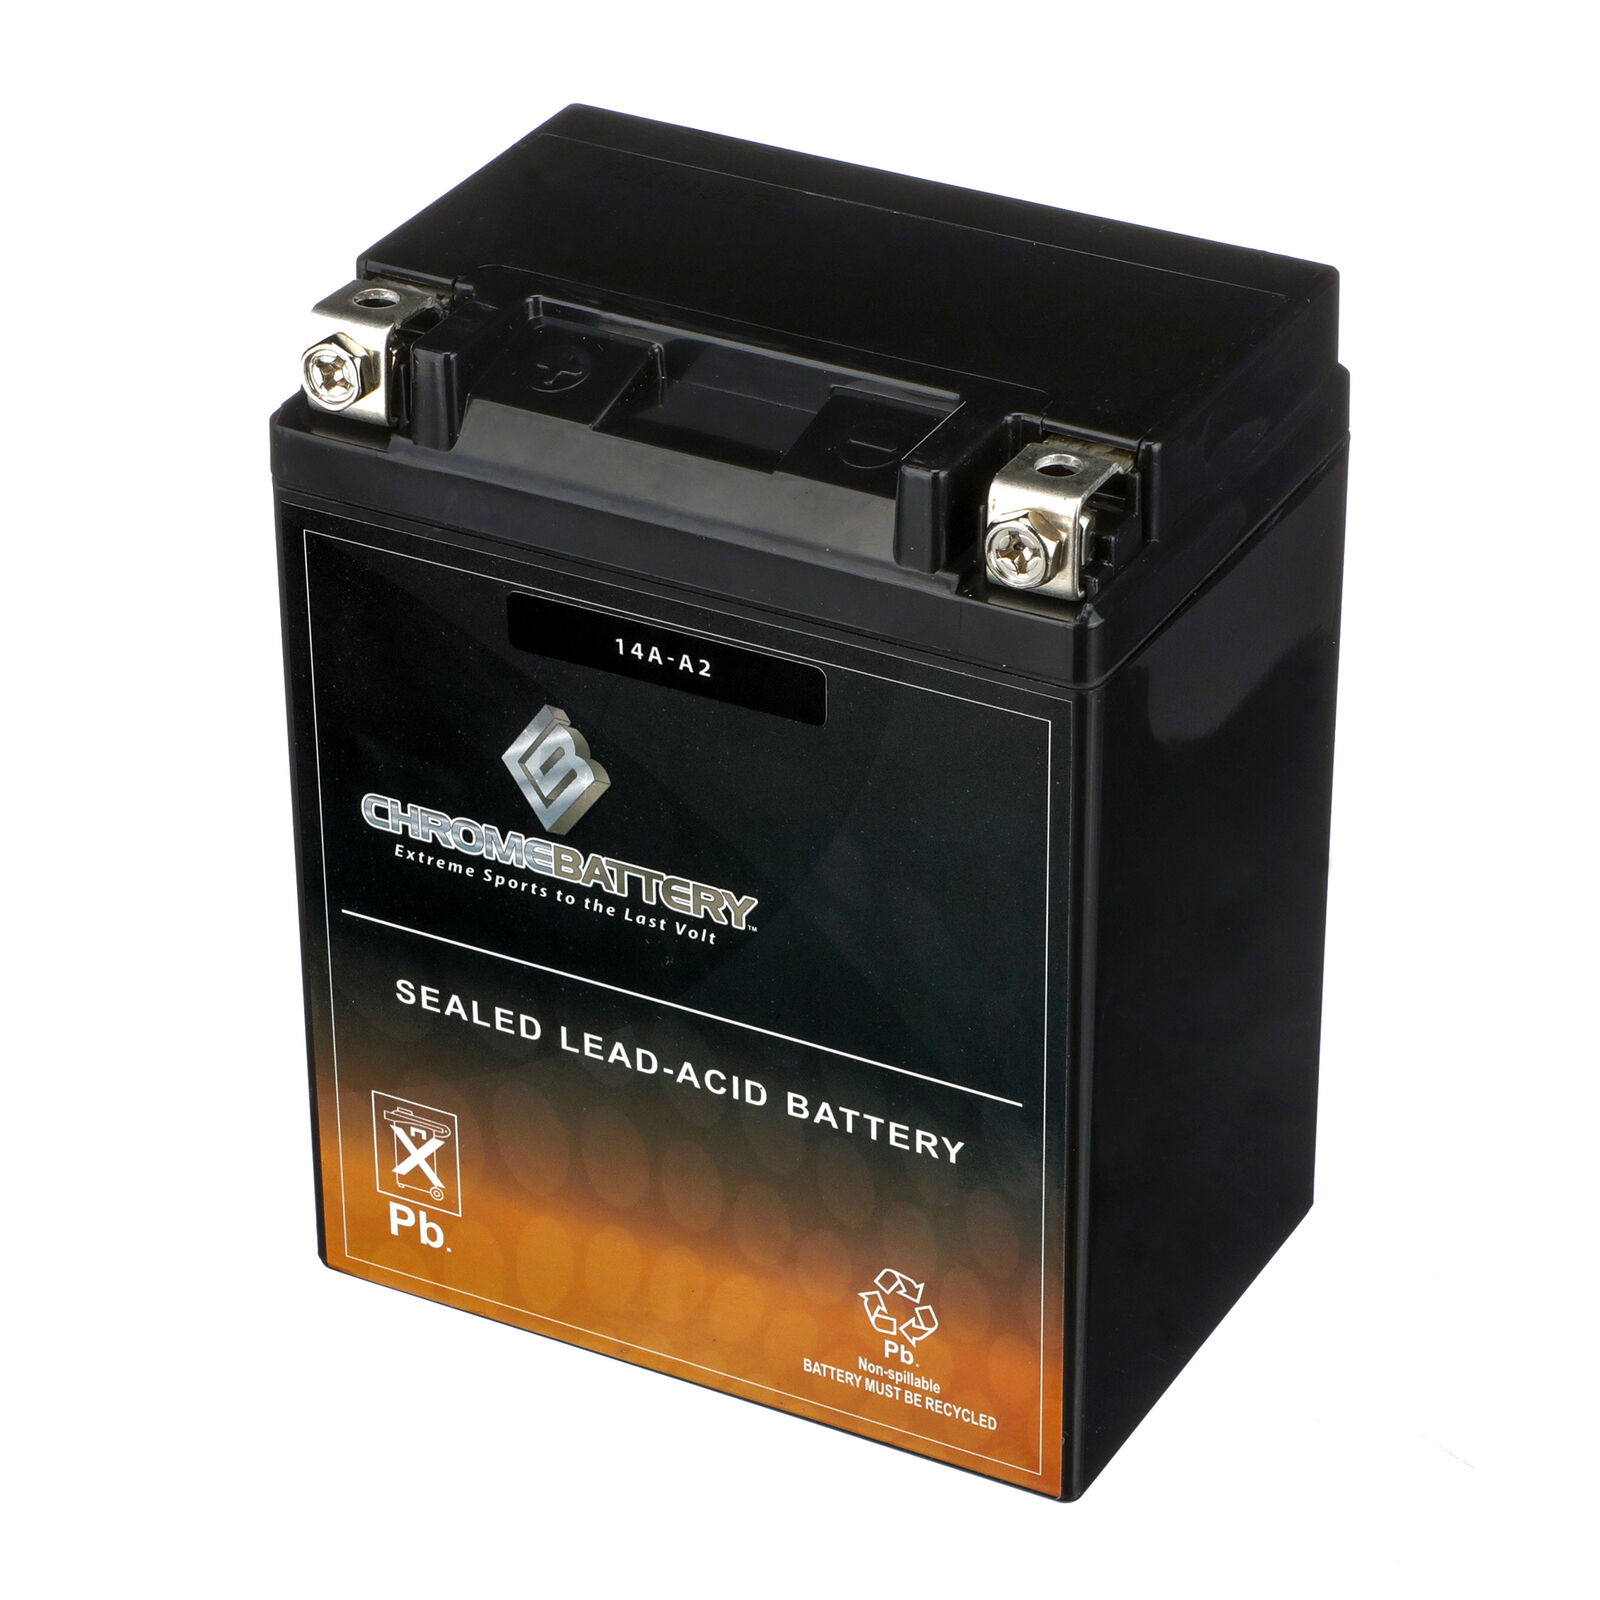 YB14A-A2 AGM LawnMower Battery for Ariens/Gravely Imperial Models RM 1330, 8028